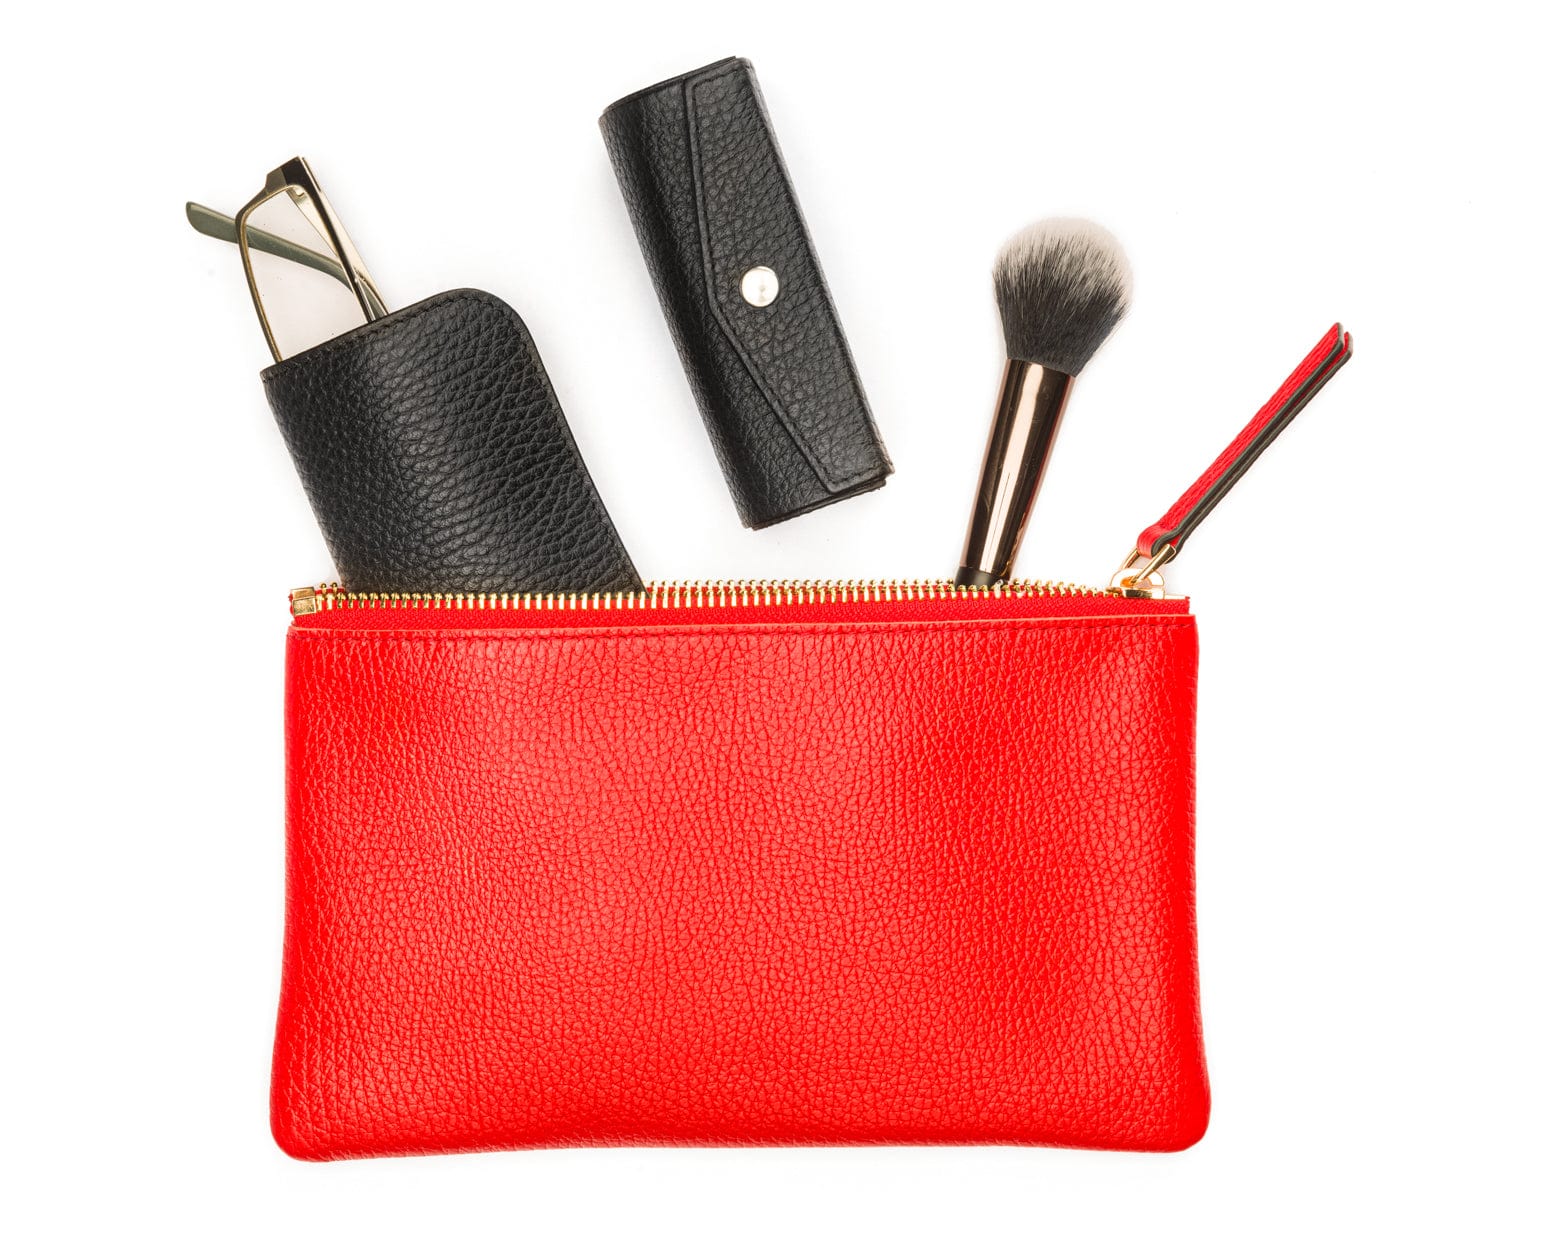 Set of 3 leather makeup bags, red, medium